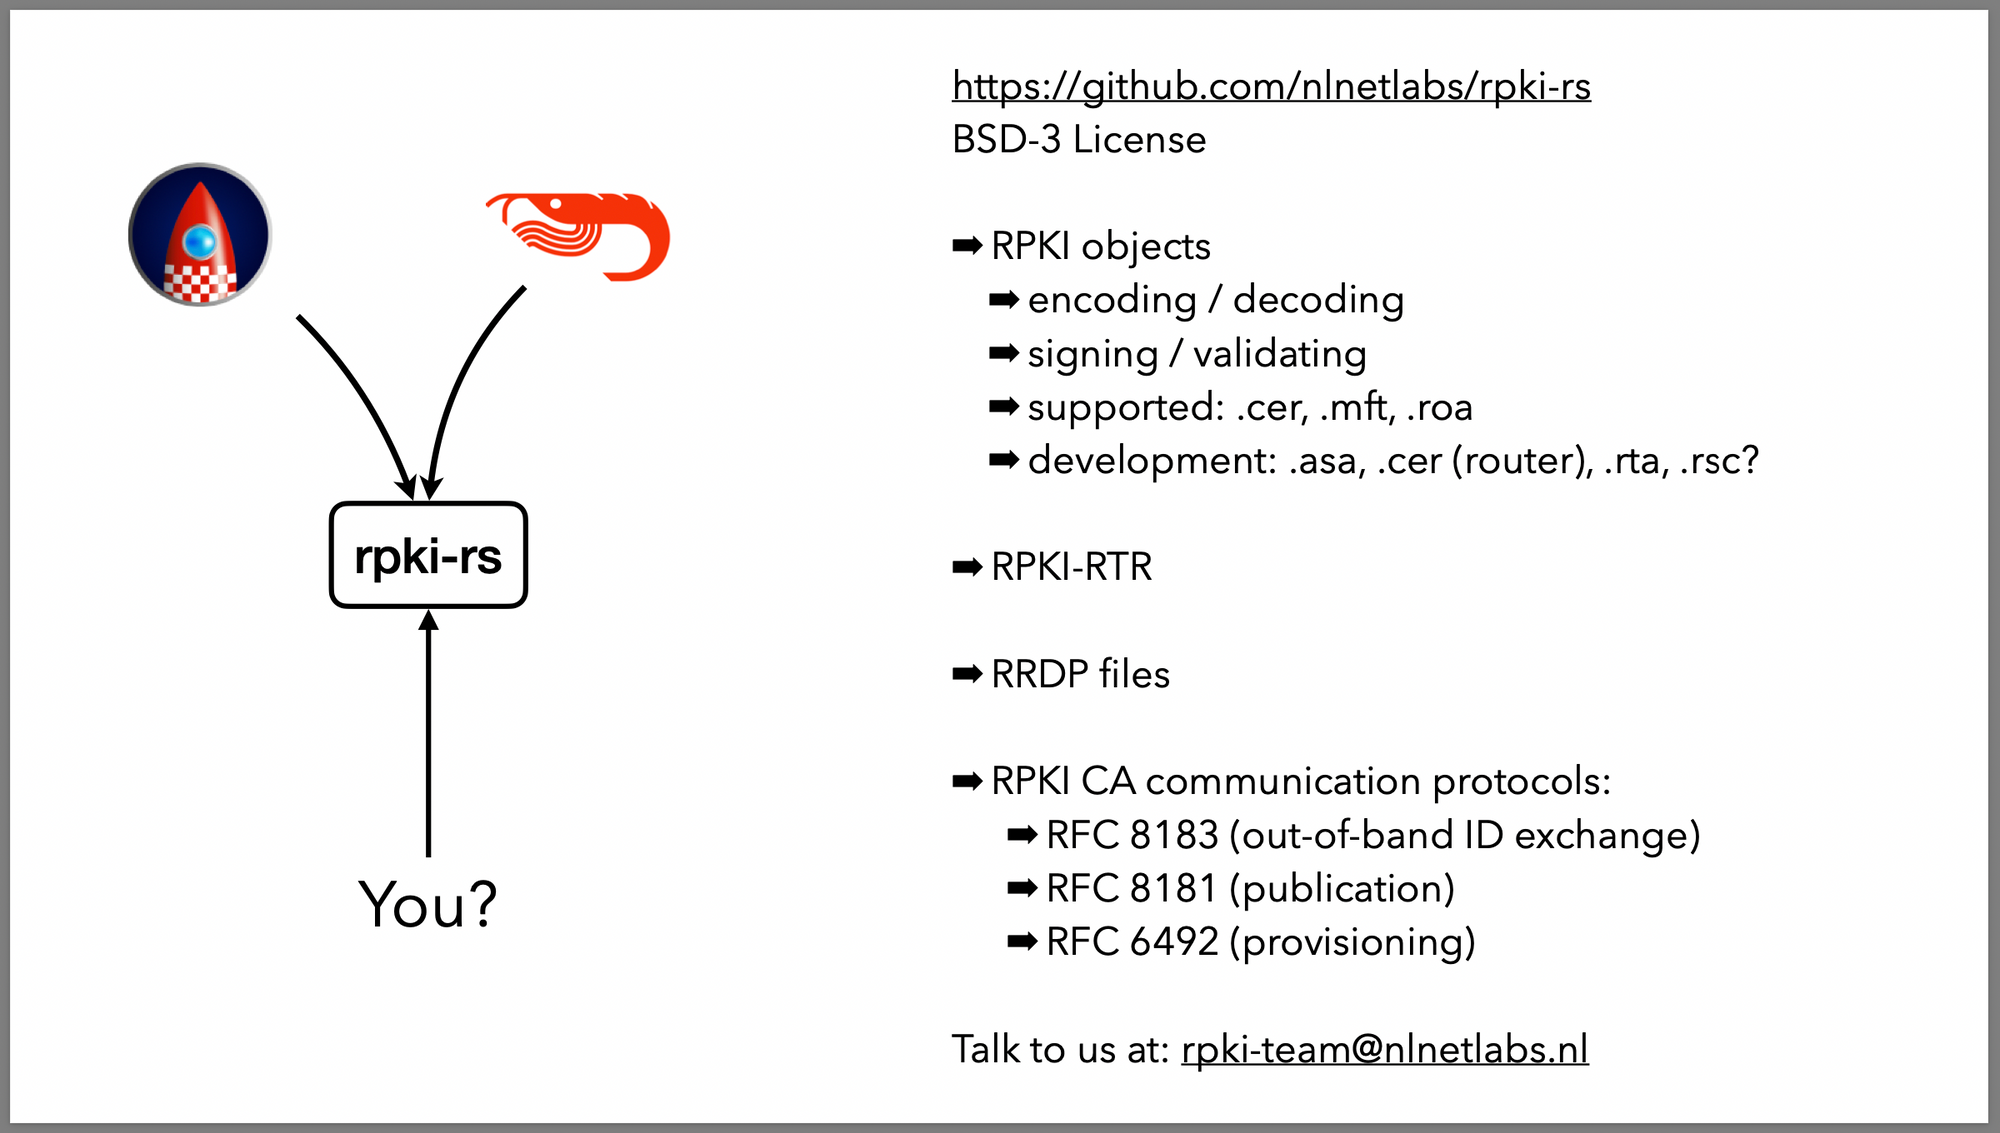 An overview of the rpki-rs capabilities